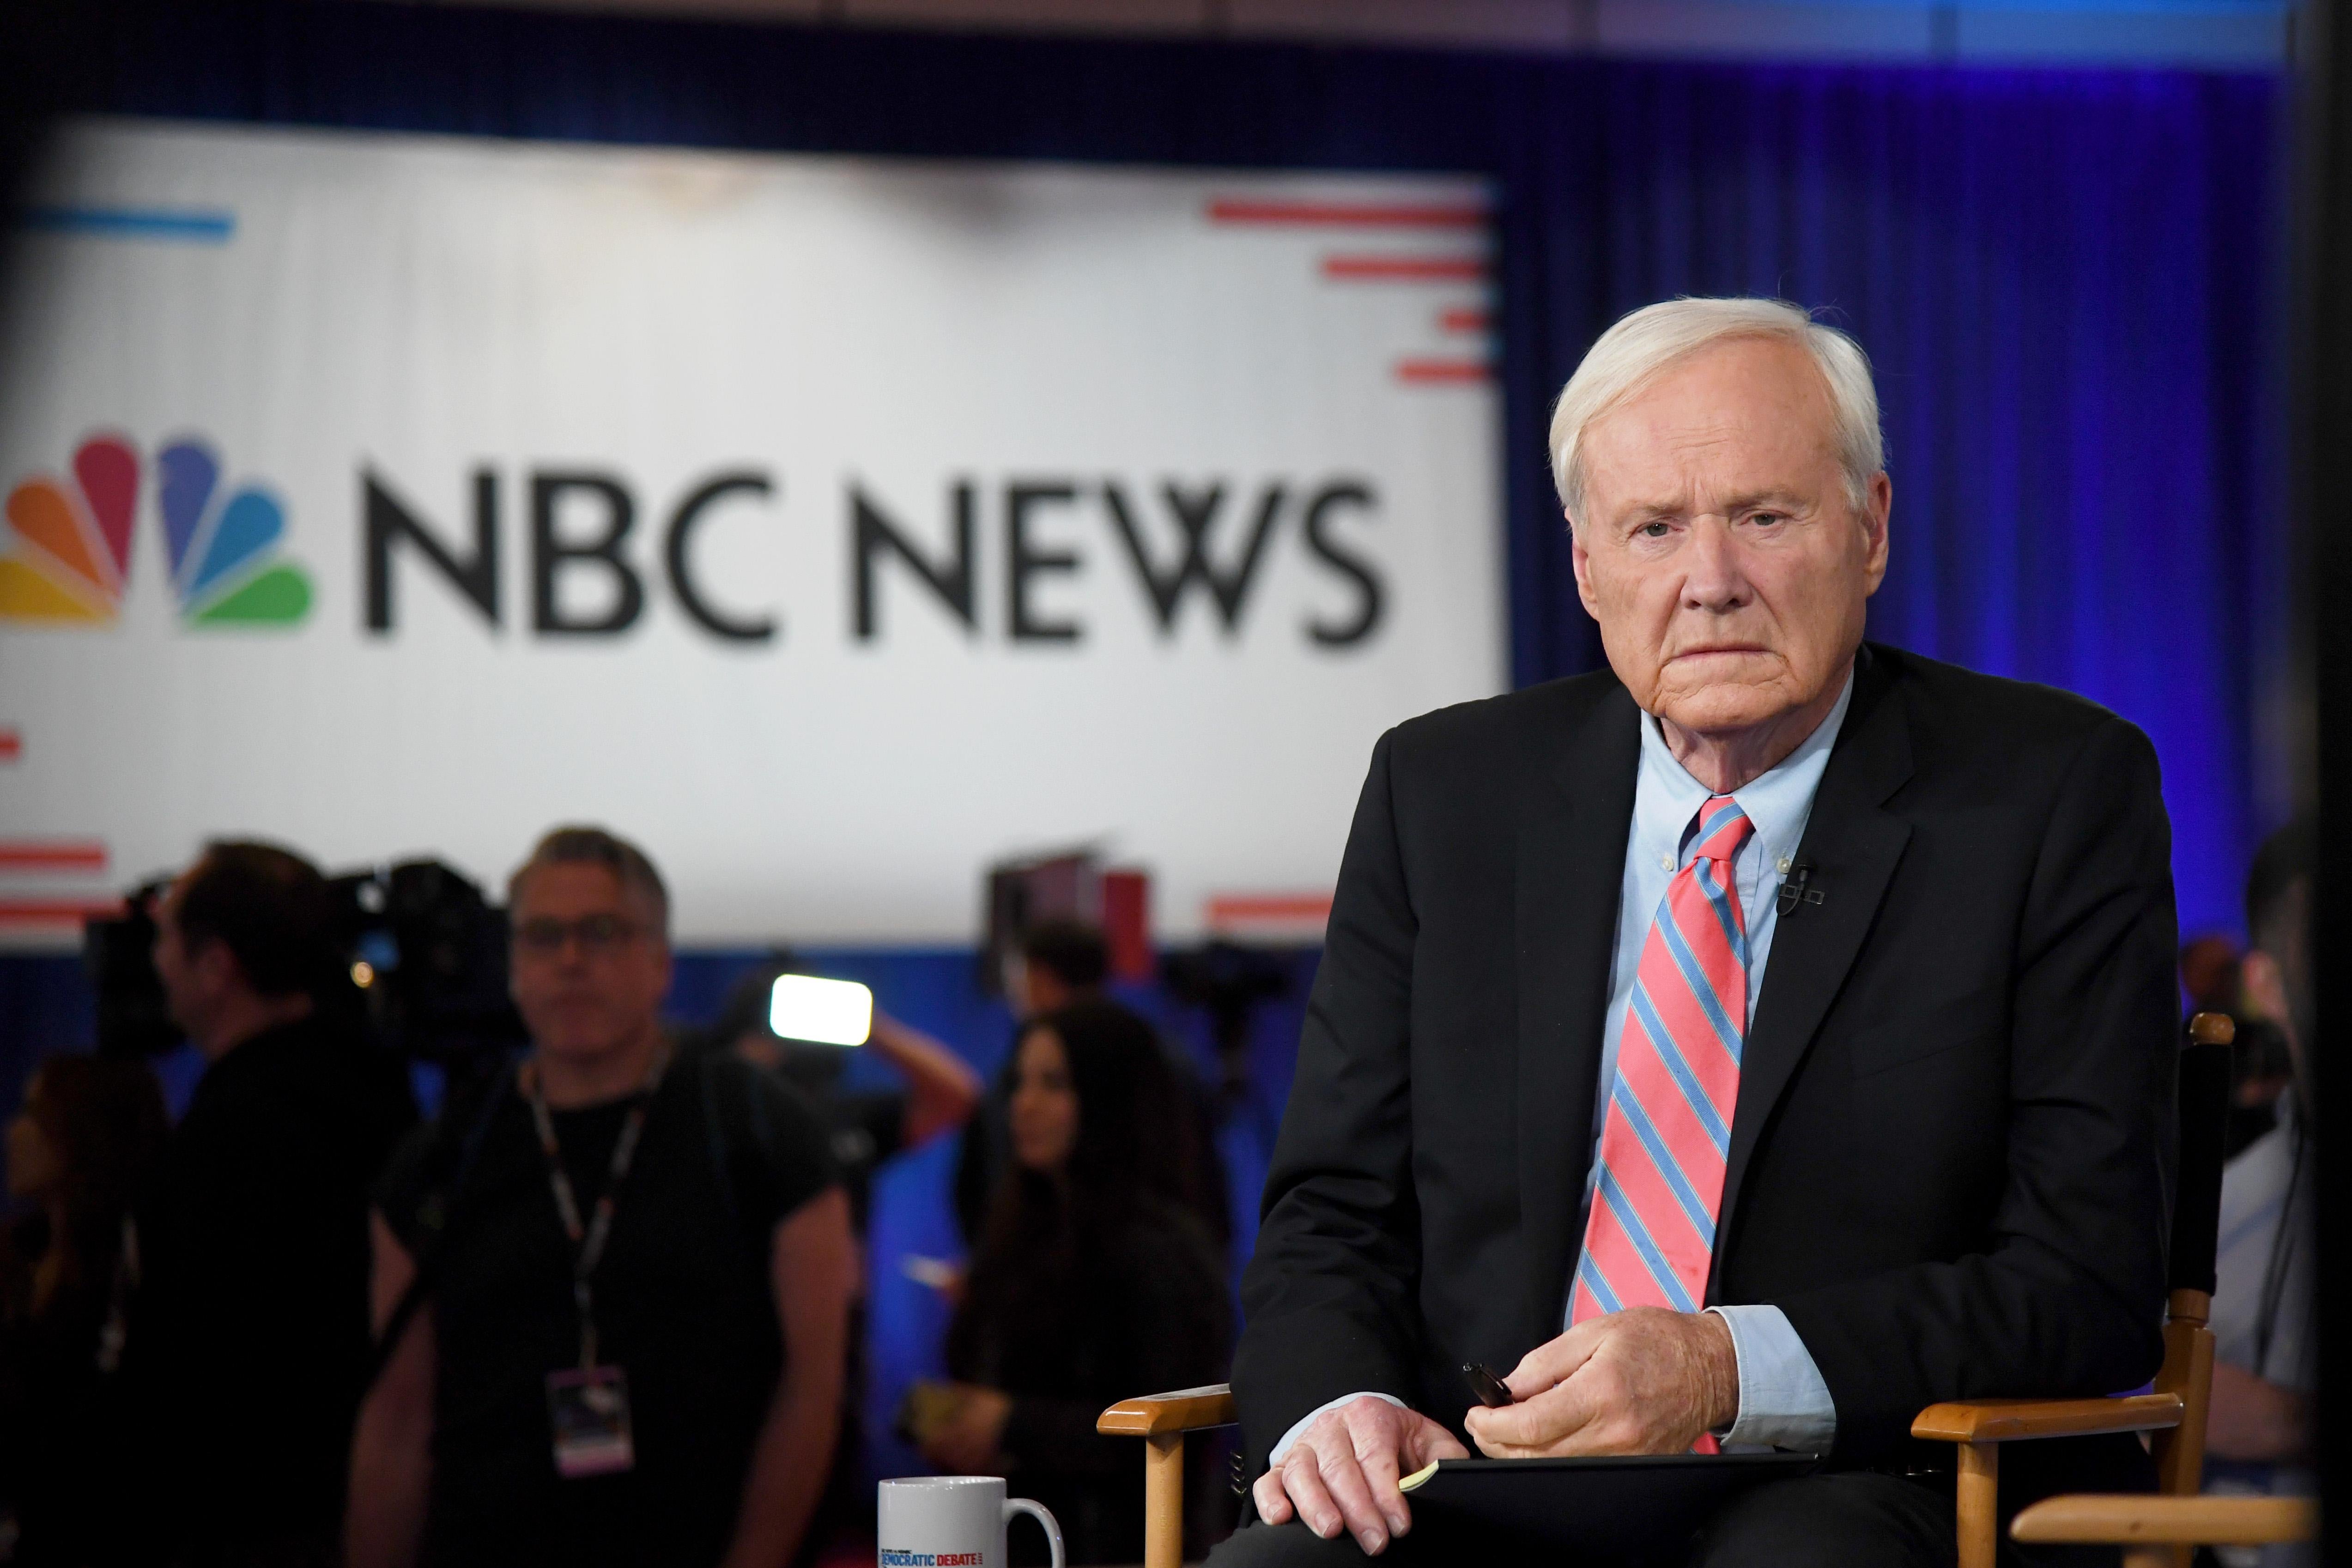 Chris Matthews seated, looking serious, before going on the air, with the NBC News logo on a screen in the background.